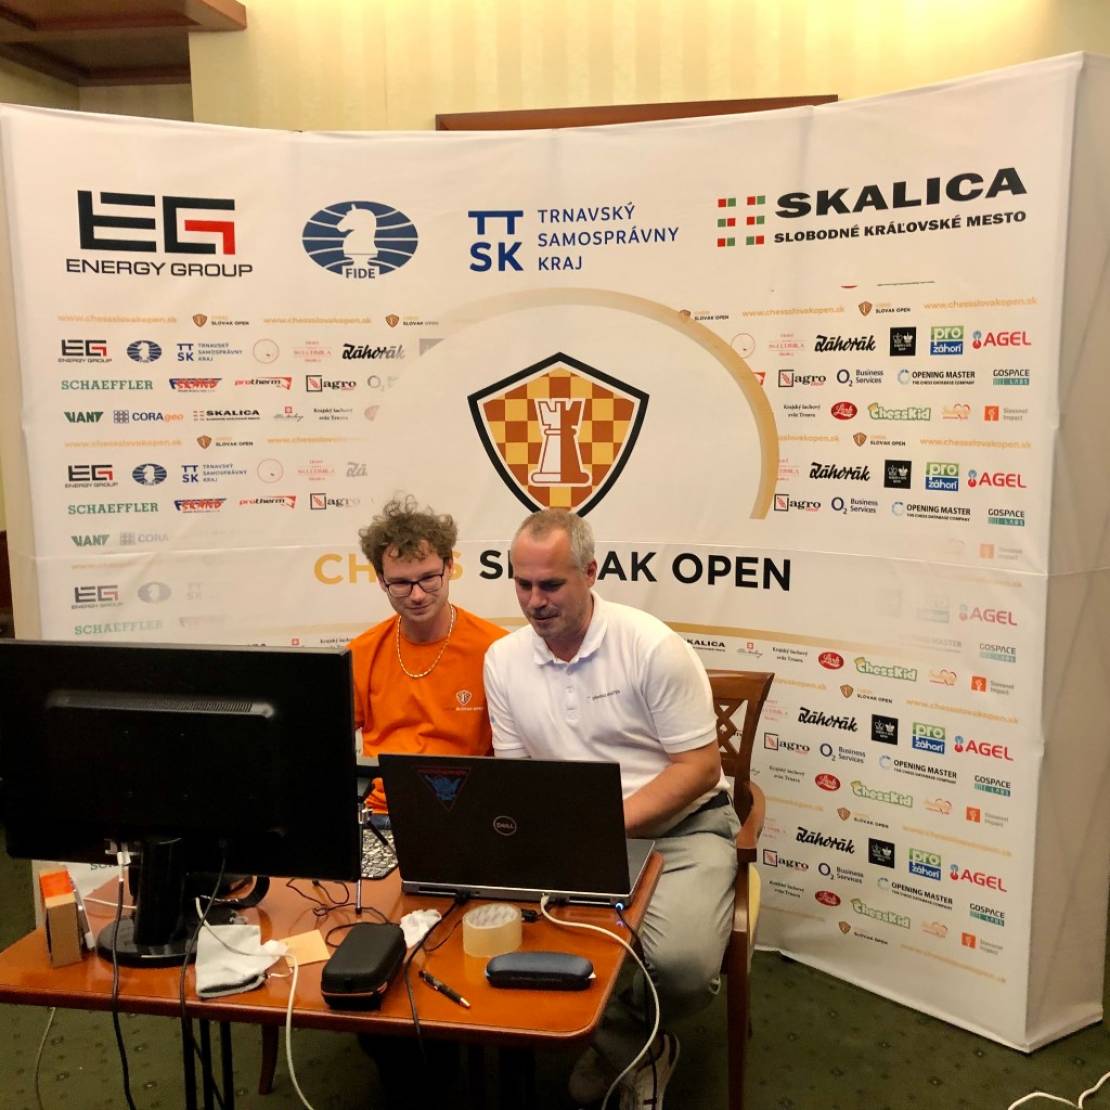 The 5th Annual Chess Slovak Open with live streaming and interview about chess databases